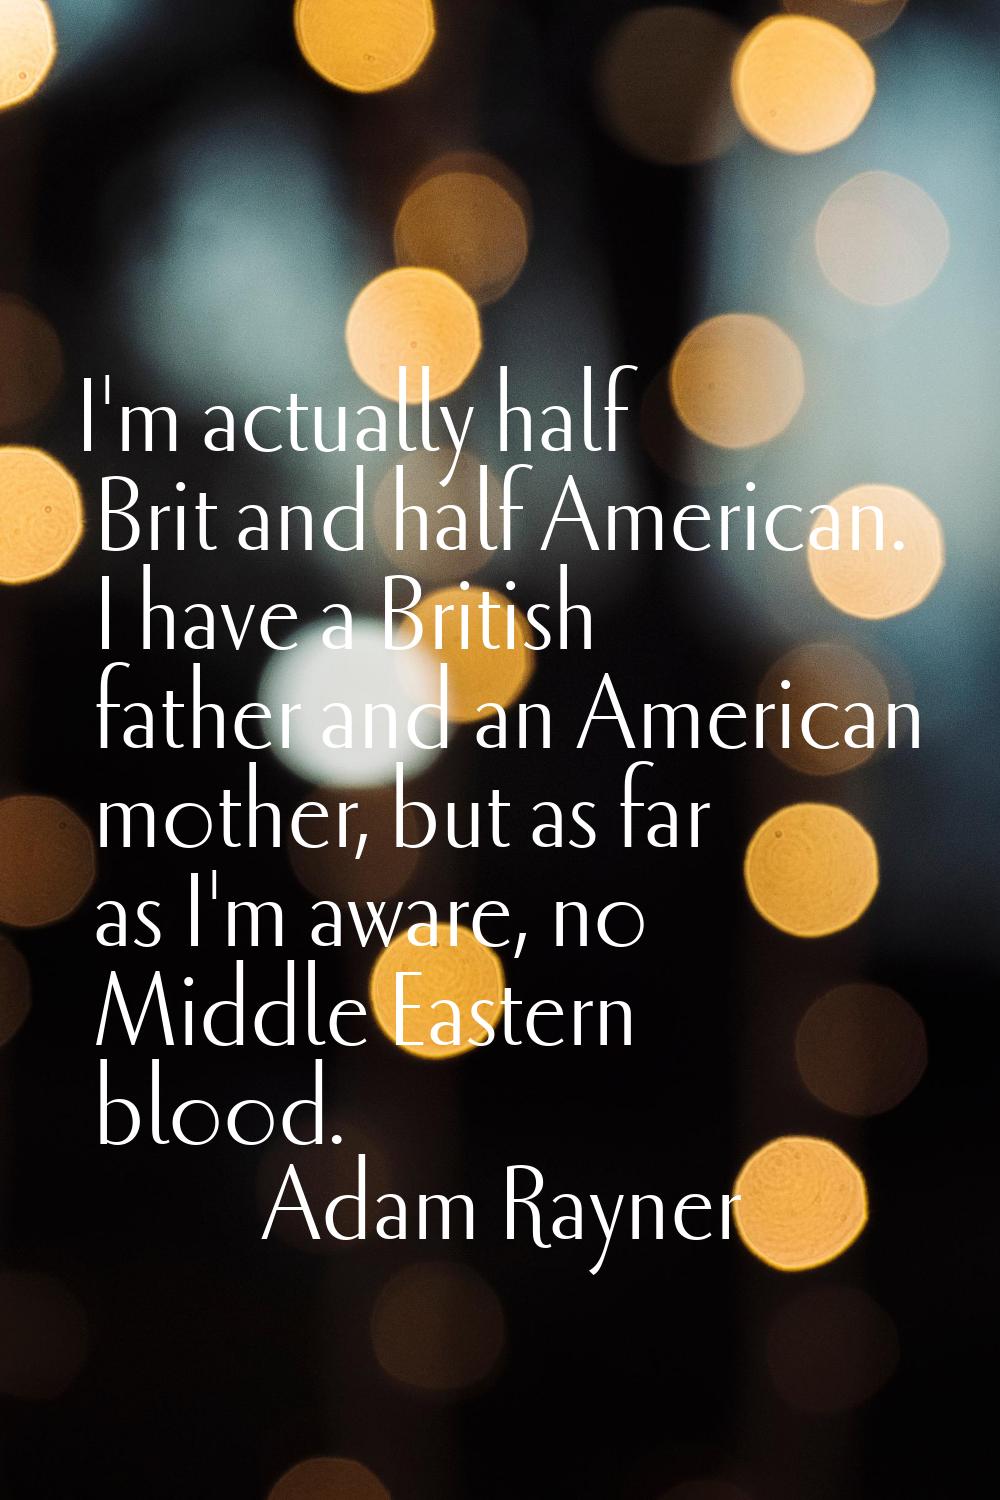 I'm actually half Brit and half American. I have a British father and an American mother, but as fa